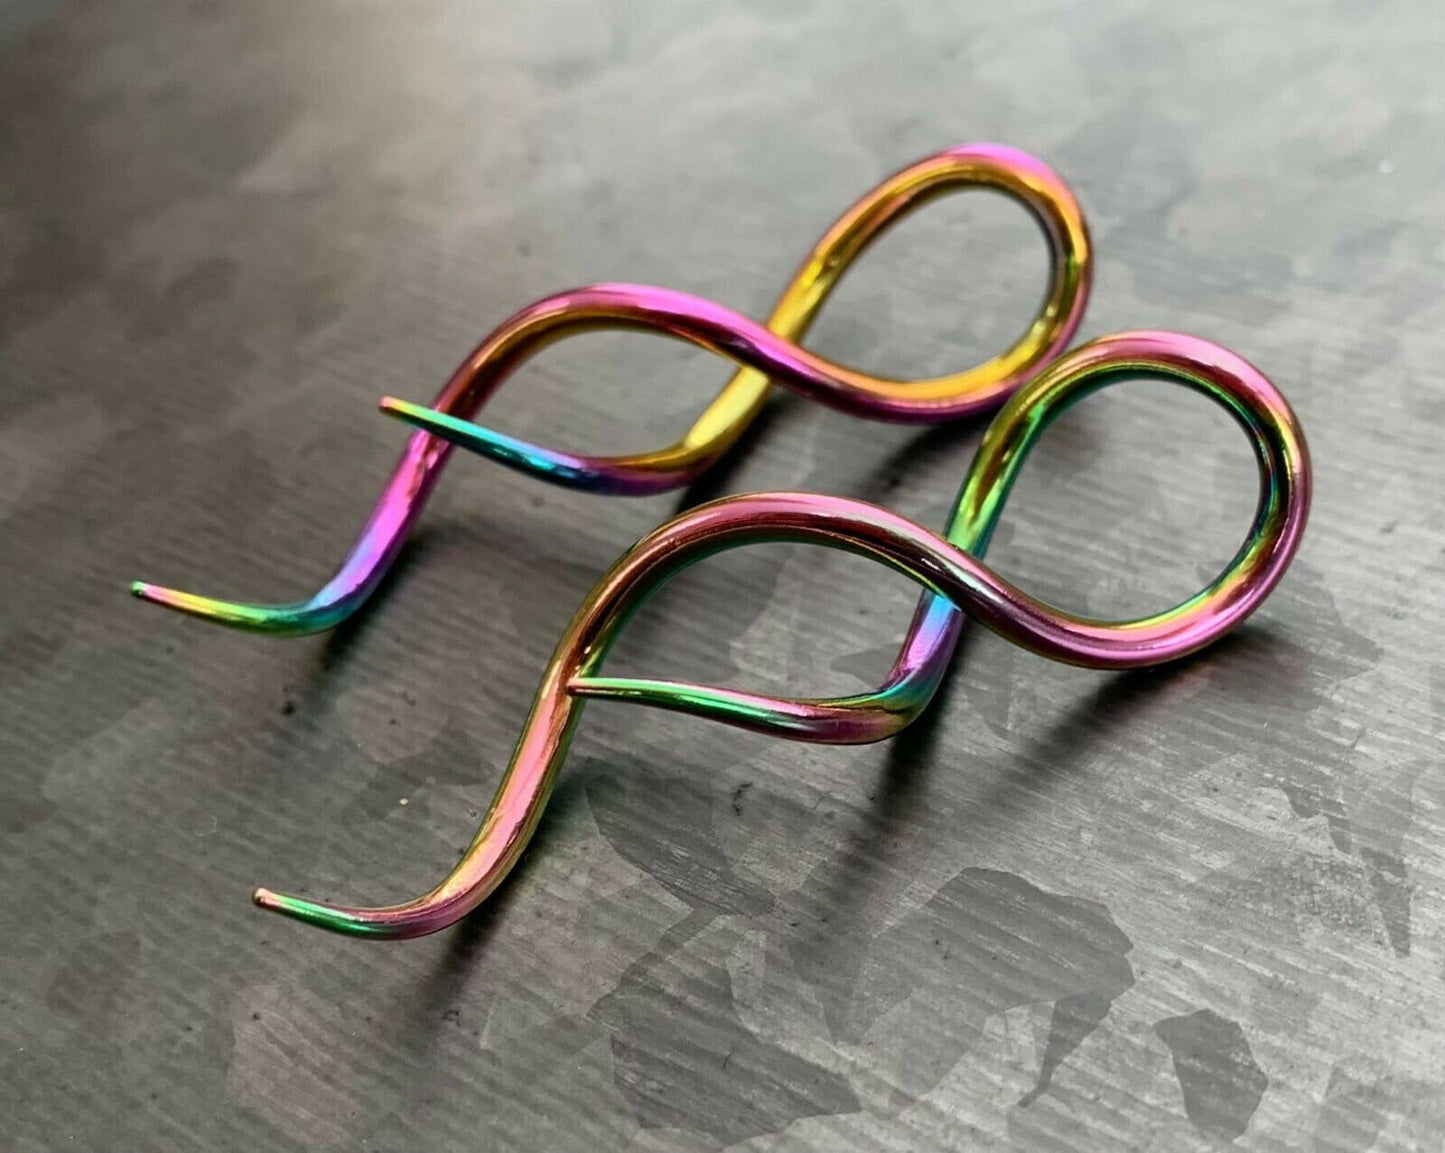 PAIR of Stunning Rainbow Steel Twist Tail Hanging Tapers Expanders / Plugs - Gauges 14g (1.6mm) thru 10g (2.4mm) available!